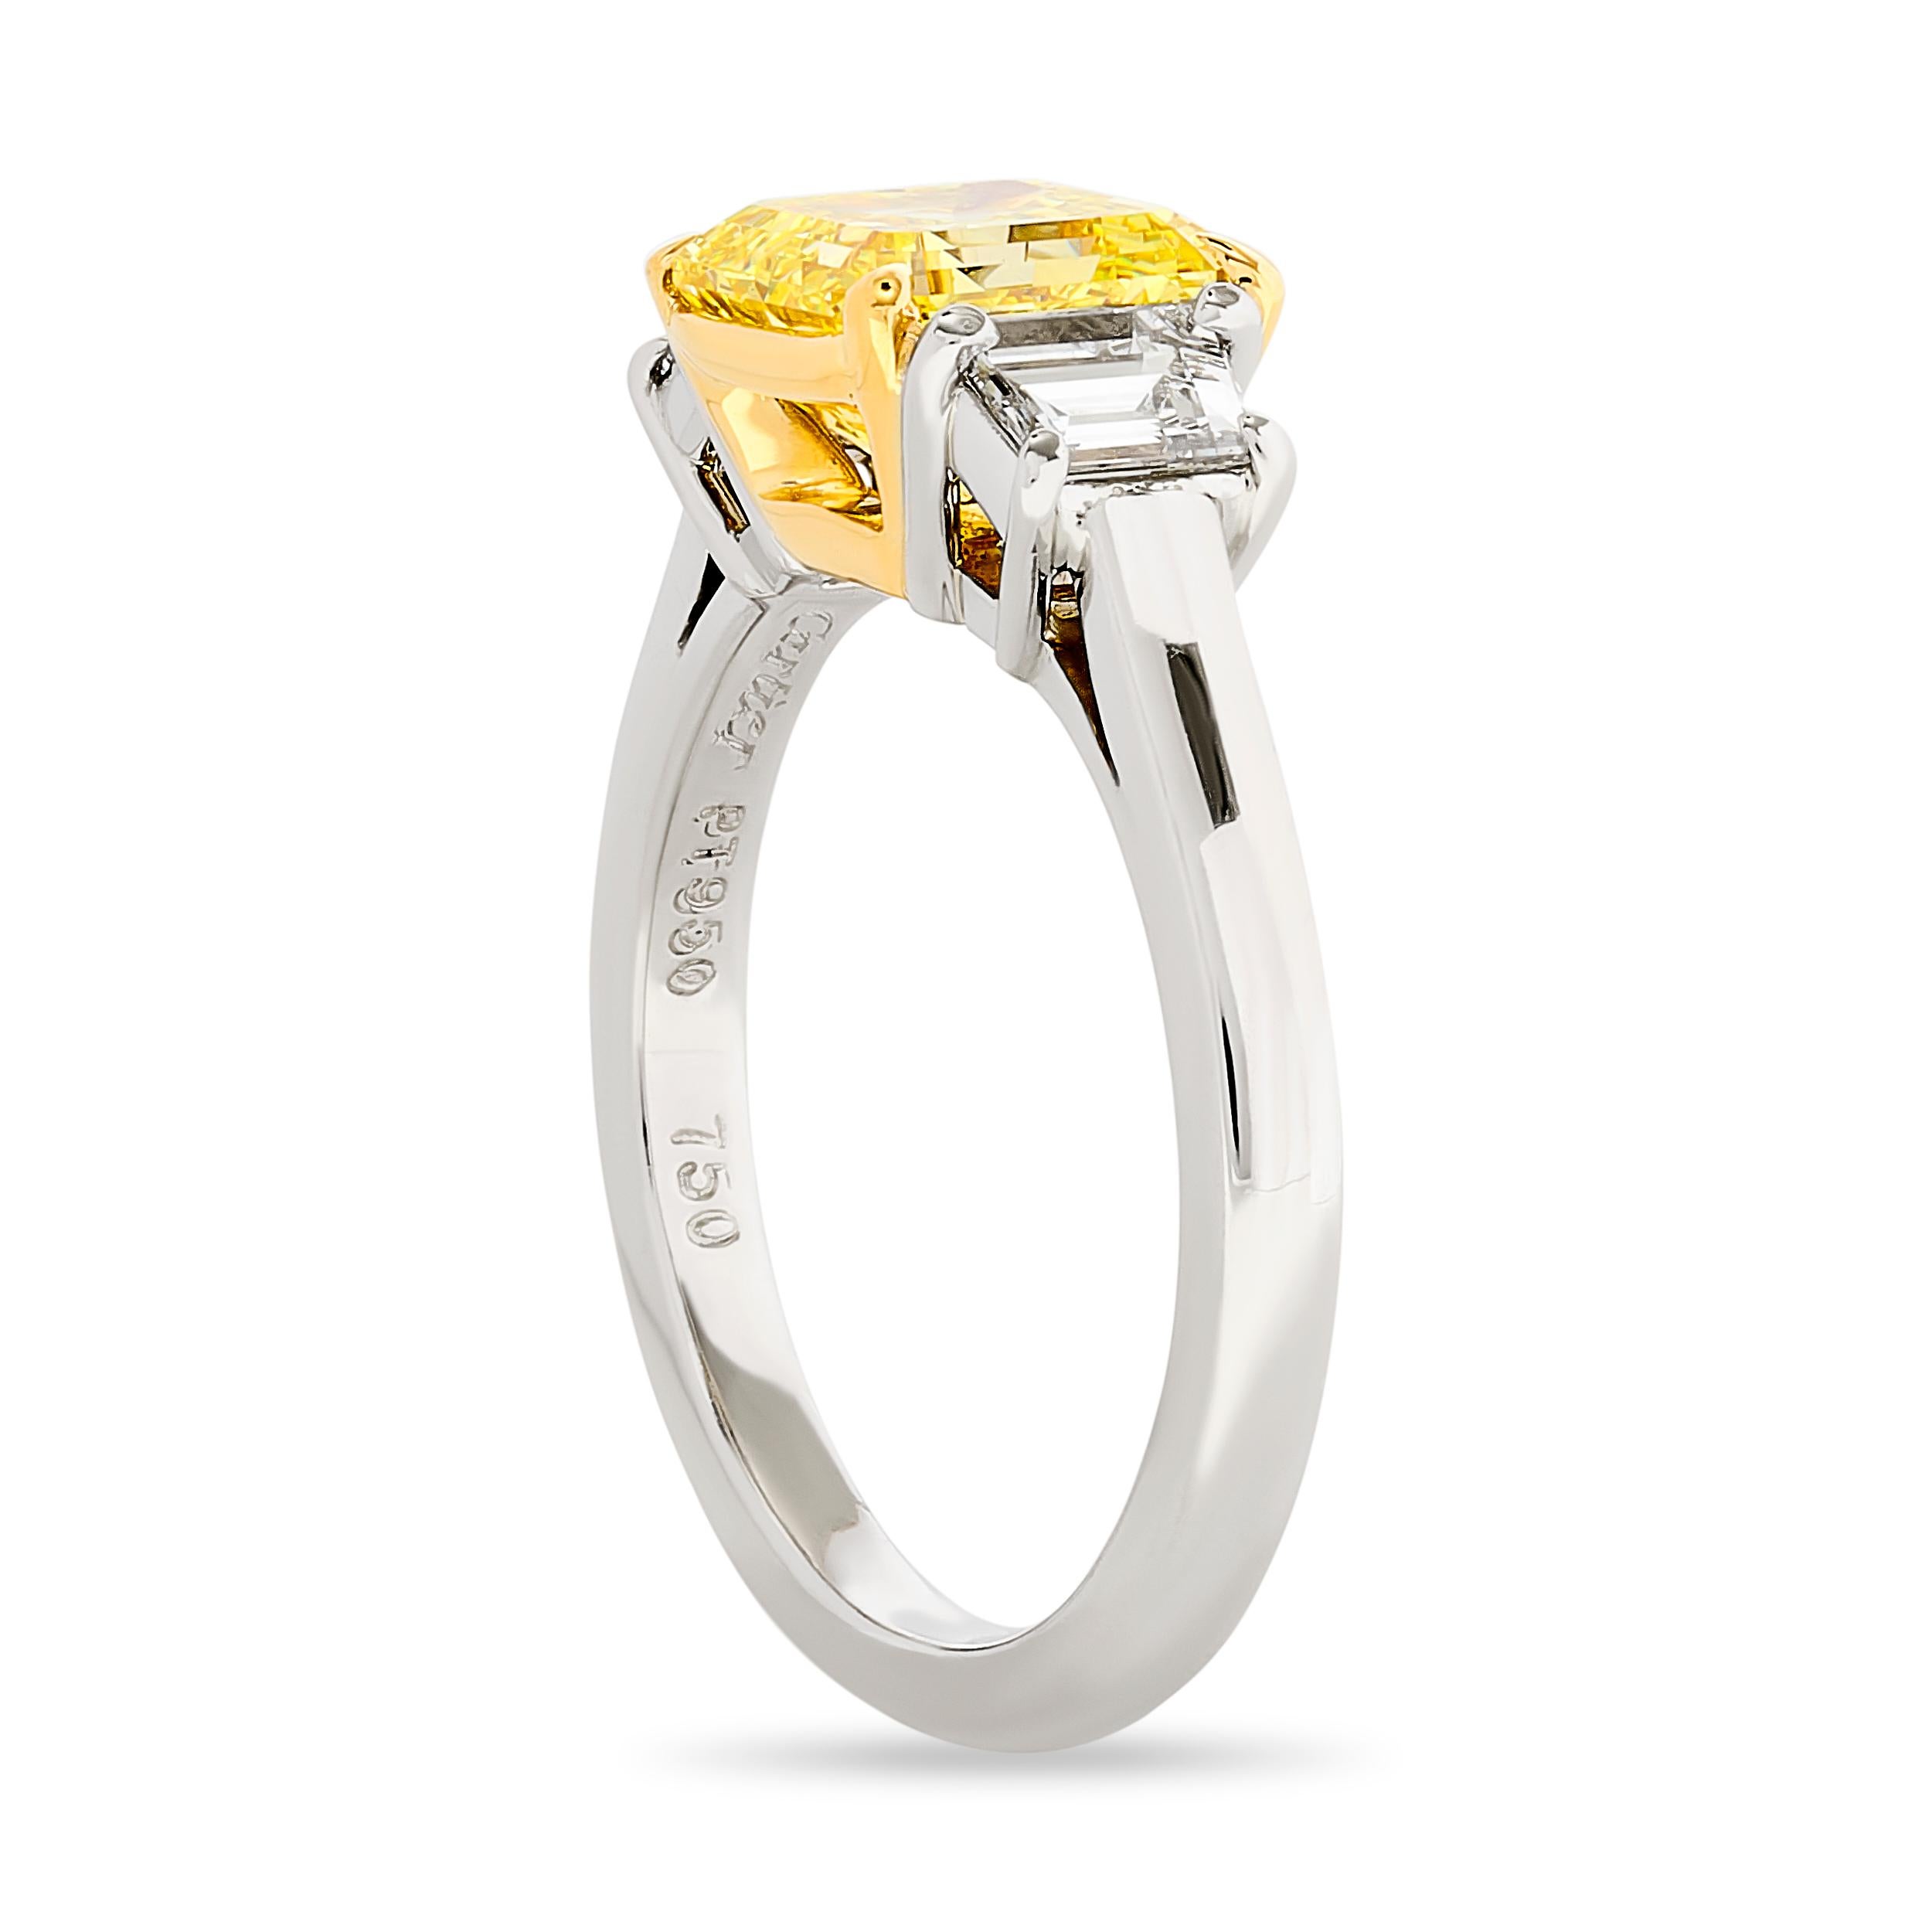 Golden Glow: Embrace the brilliance of this Cartier 3 stone diamond ring featuring a Fancy Intense Yellow square emerald cut diamond at its heart.

Made in platinum and 18k yellow gold, this ring has:
1 square emerald cut that weighs ~2.01 carat and